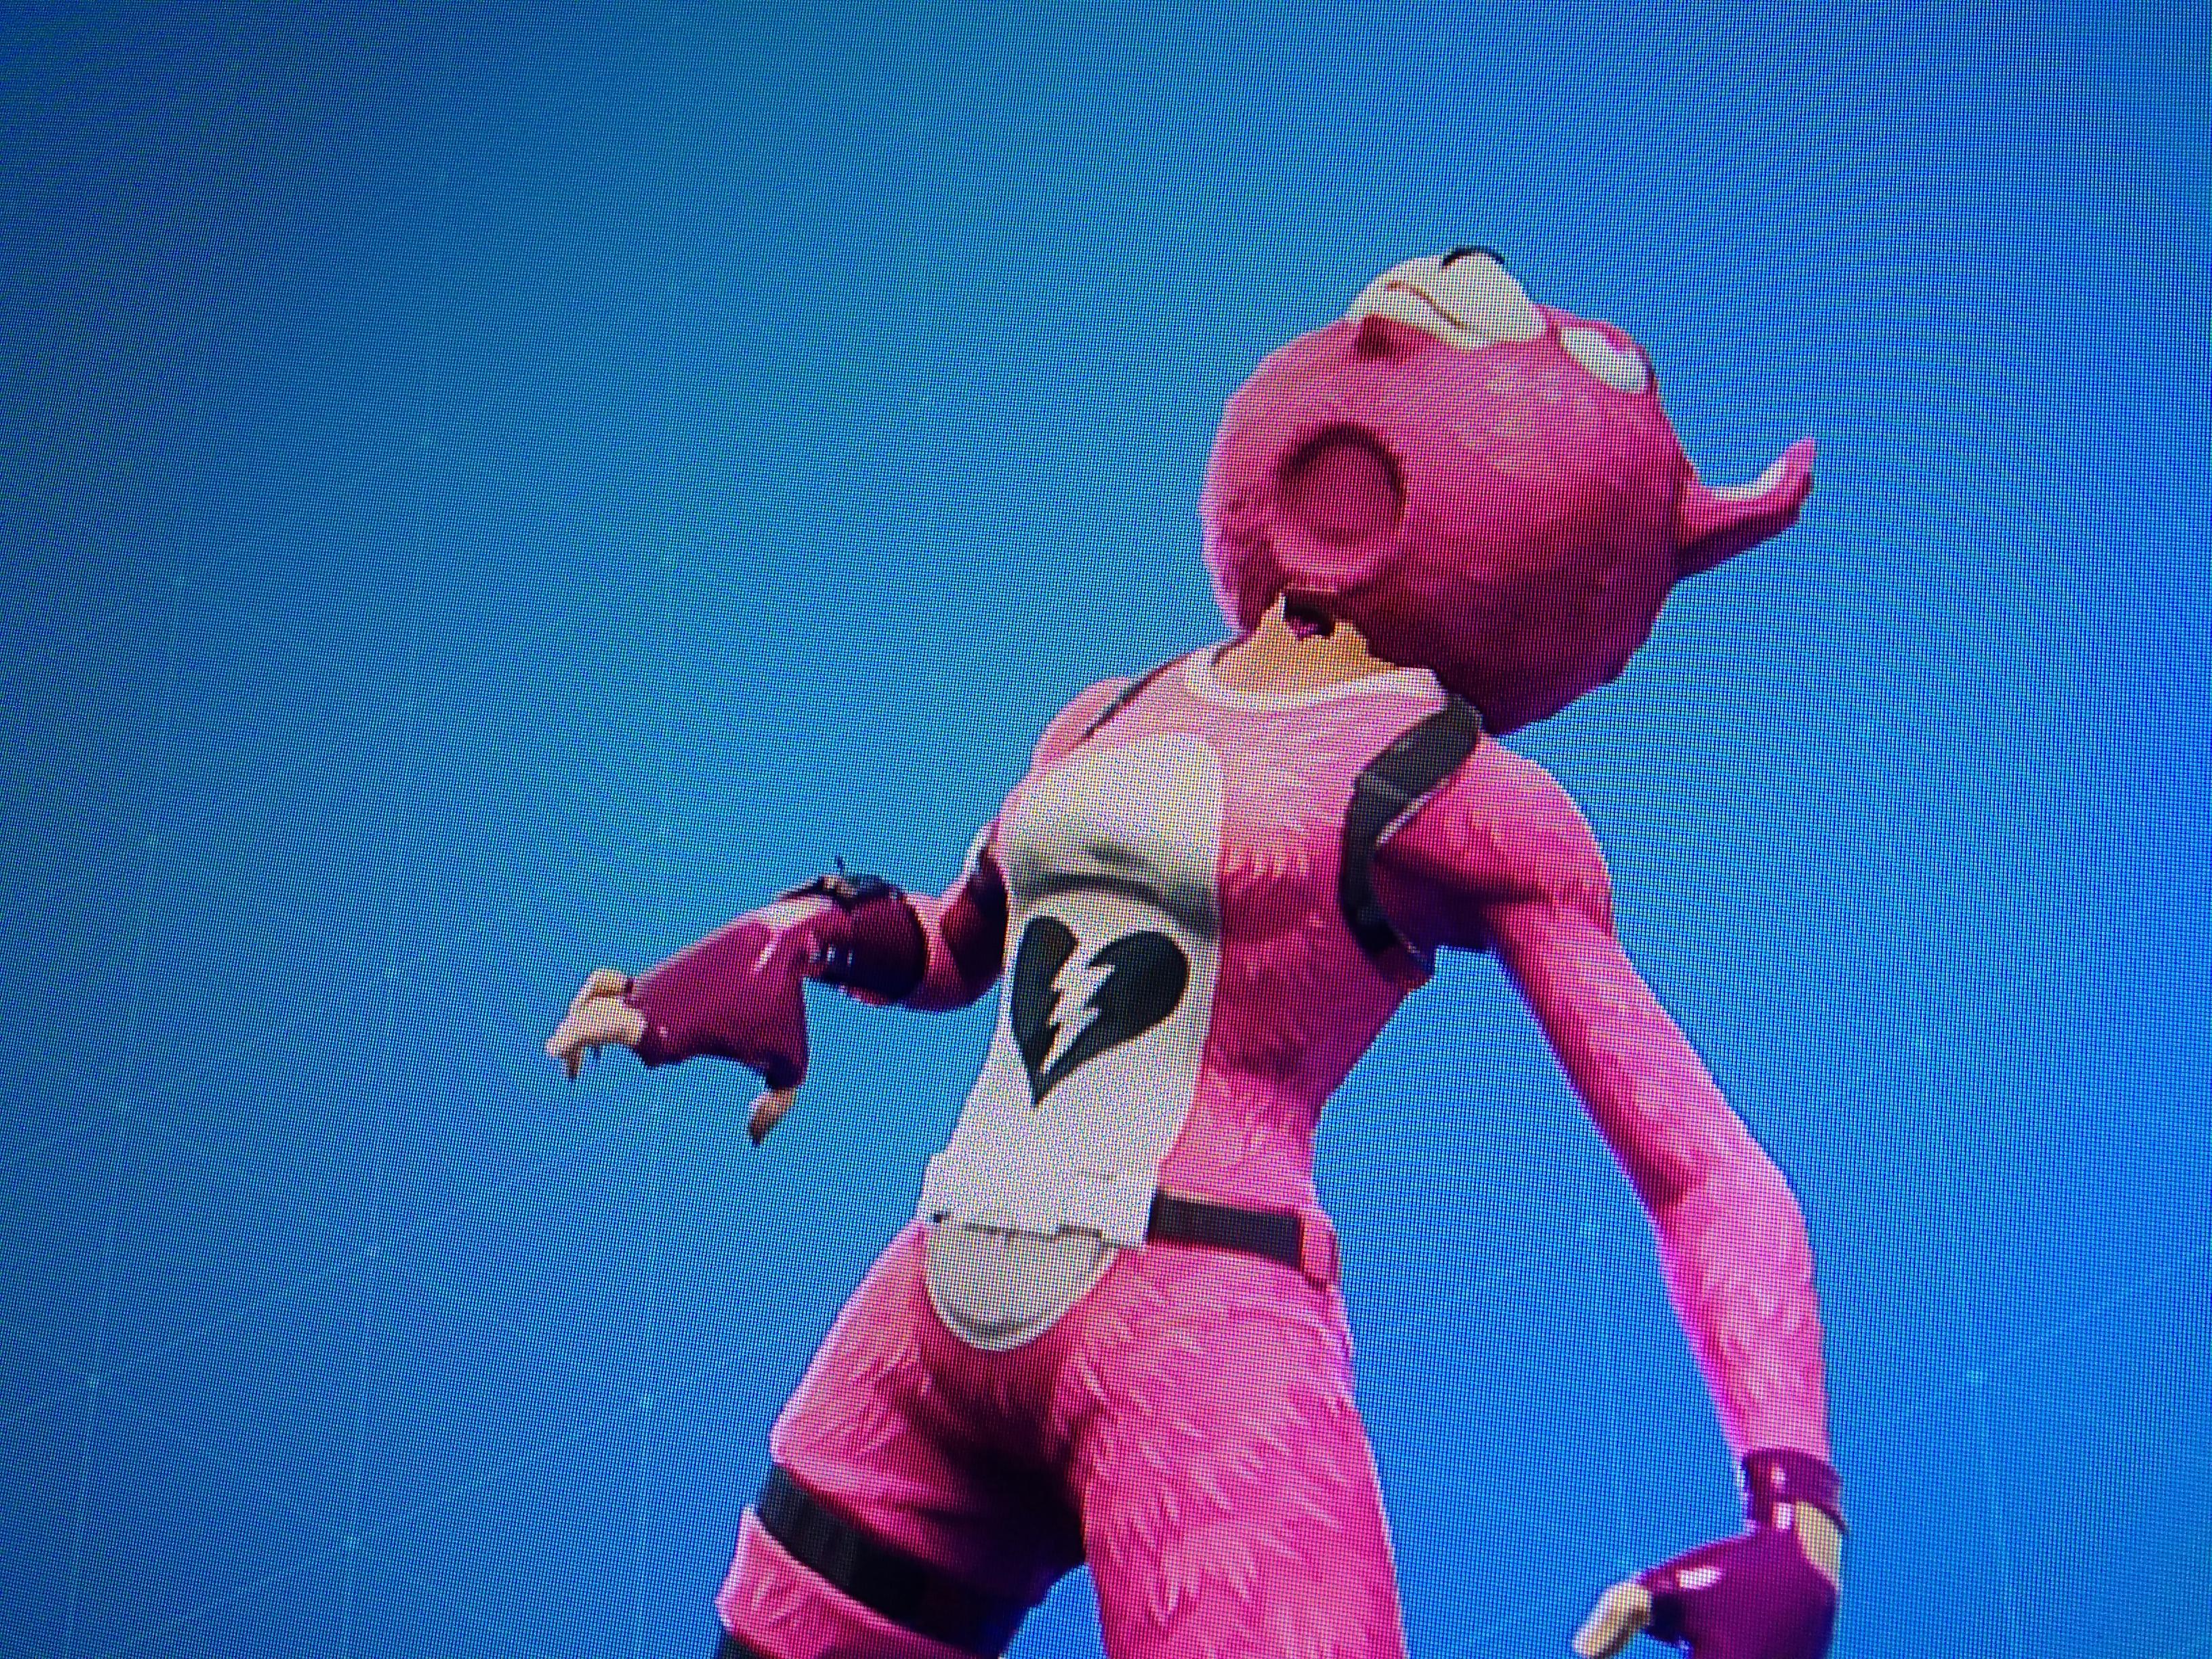 Cuddle team leader is temporarily disabled while we investigate